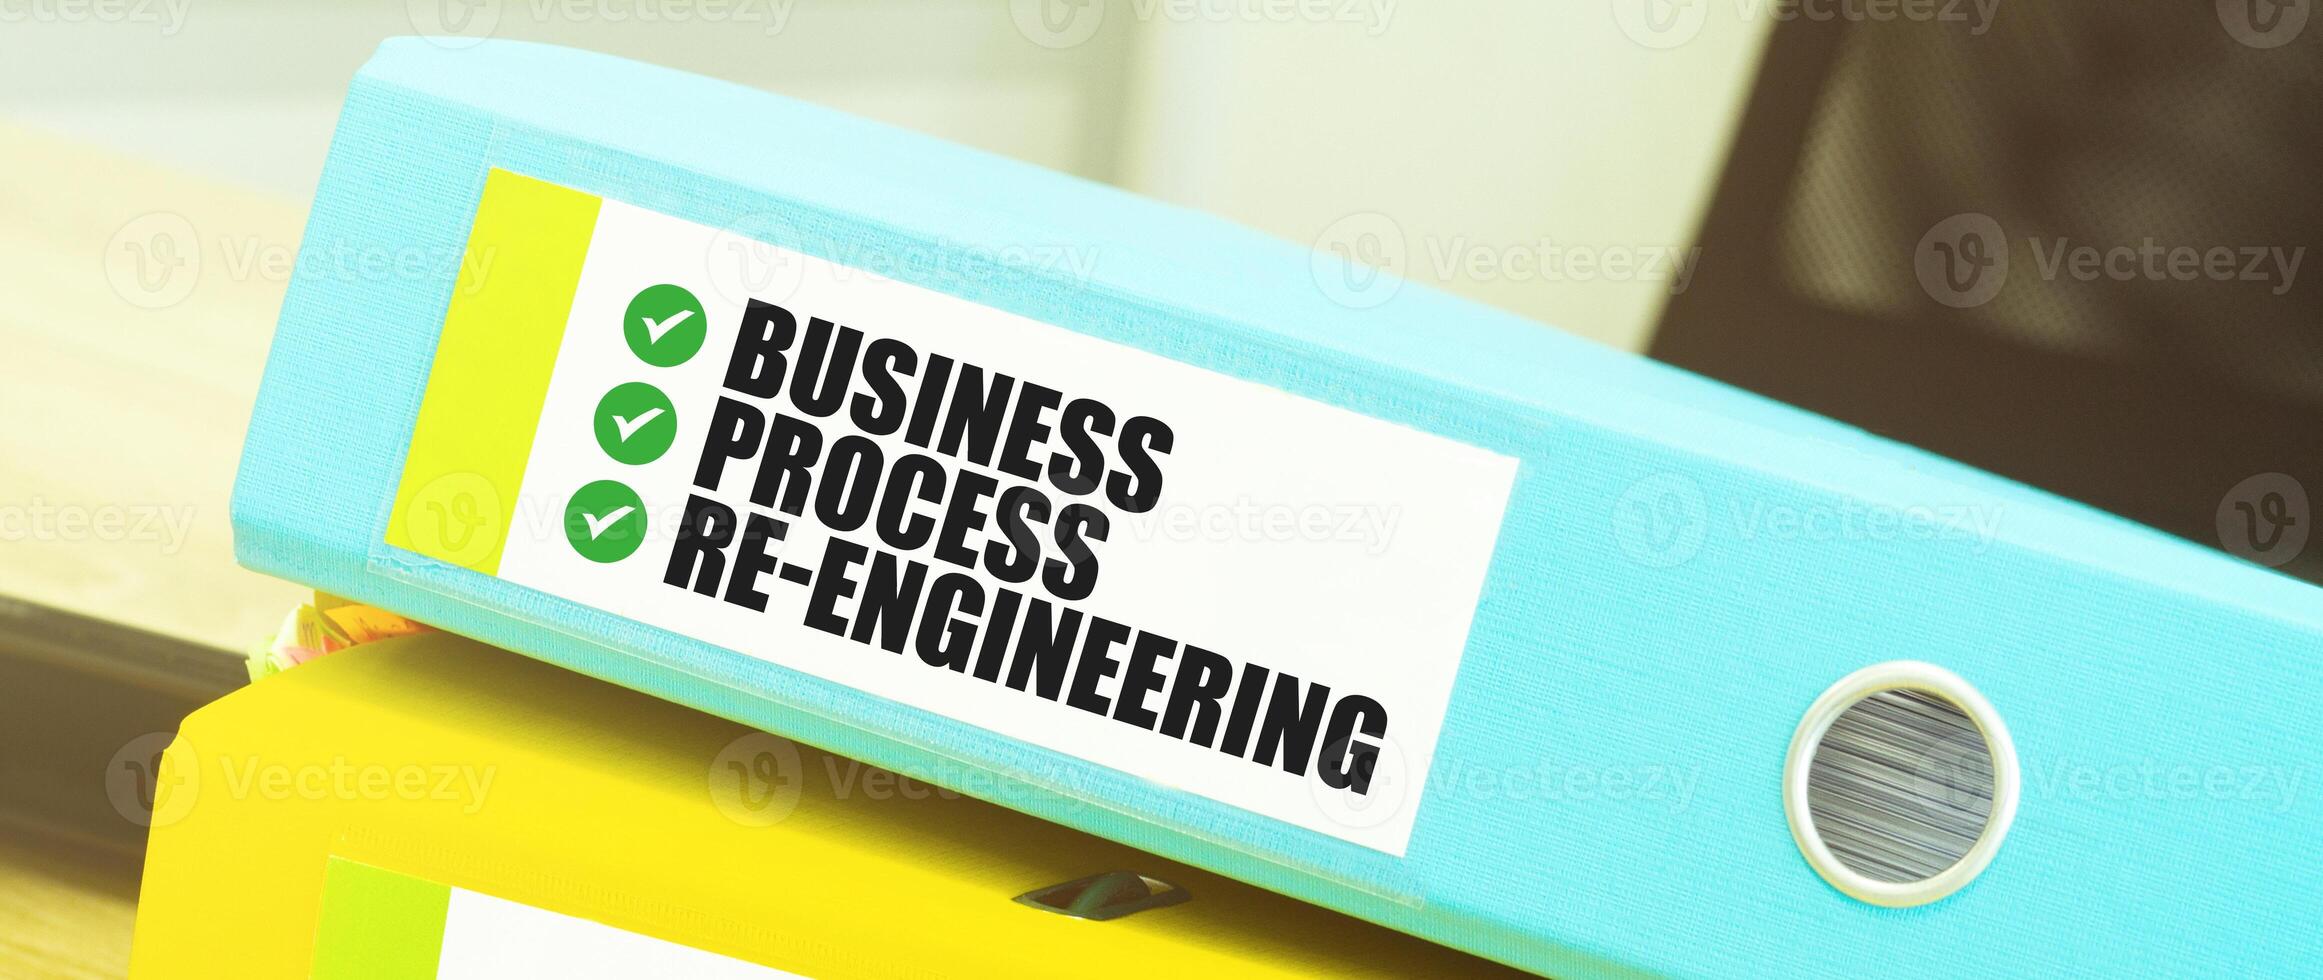 Two office folders with text BUSINESS PROCESS RE ENGINEEERING photo